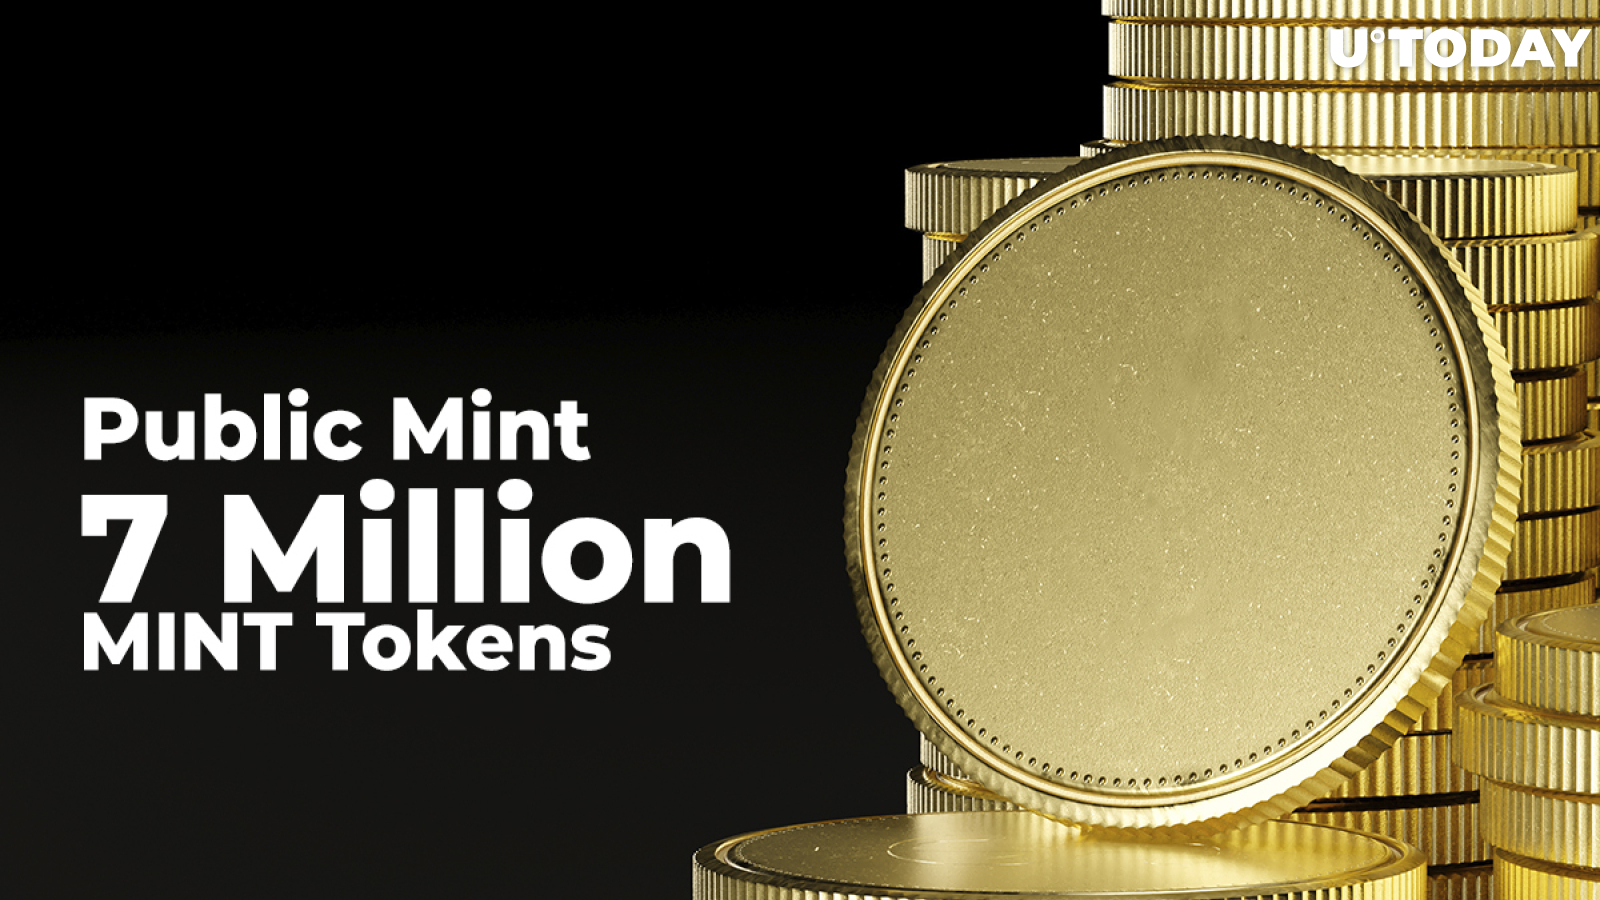 Public Mint Users Moved 7 Million MINT Tokens in First 24 Hours: Details